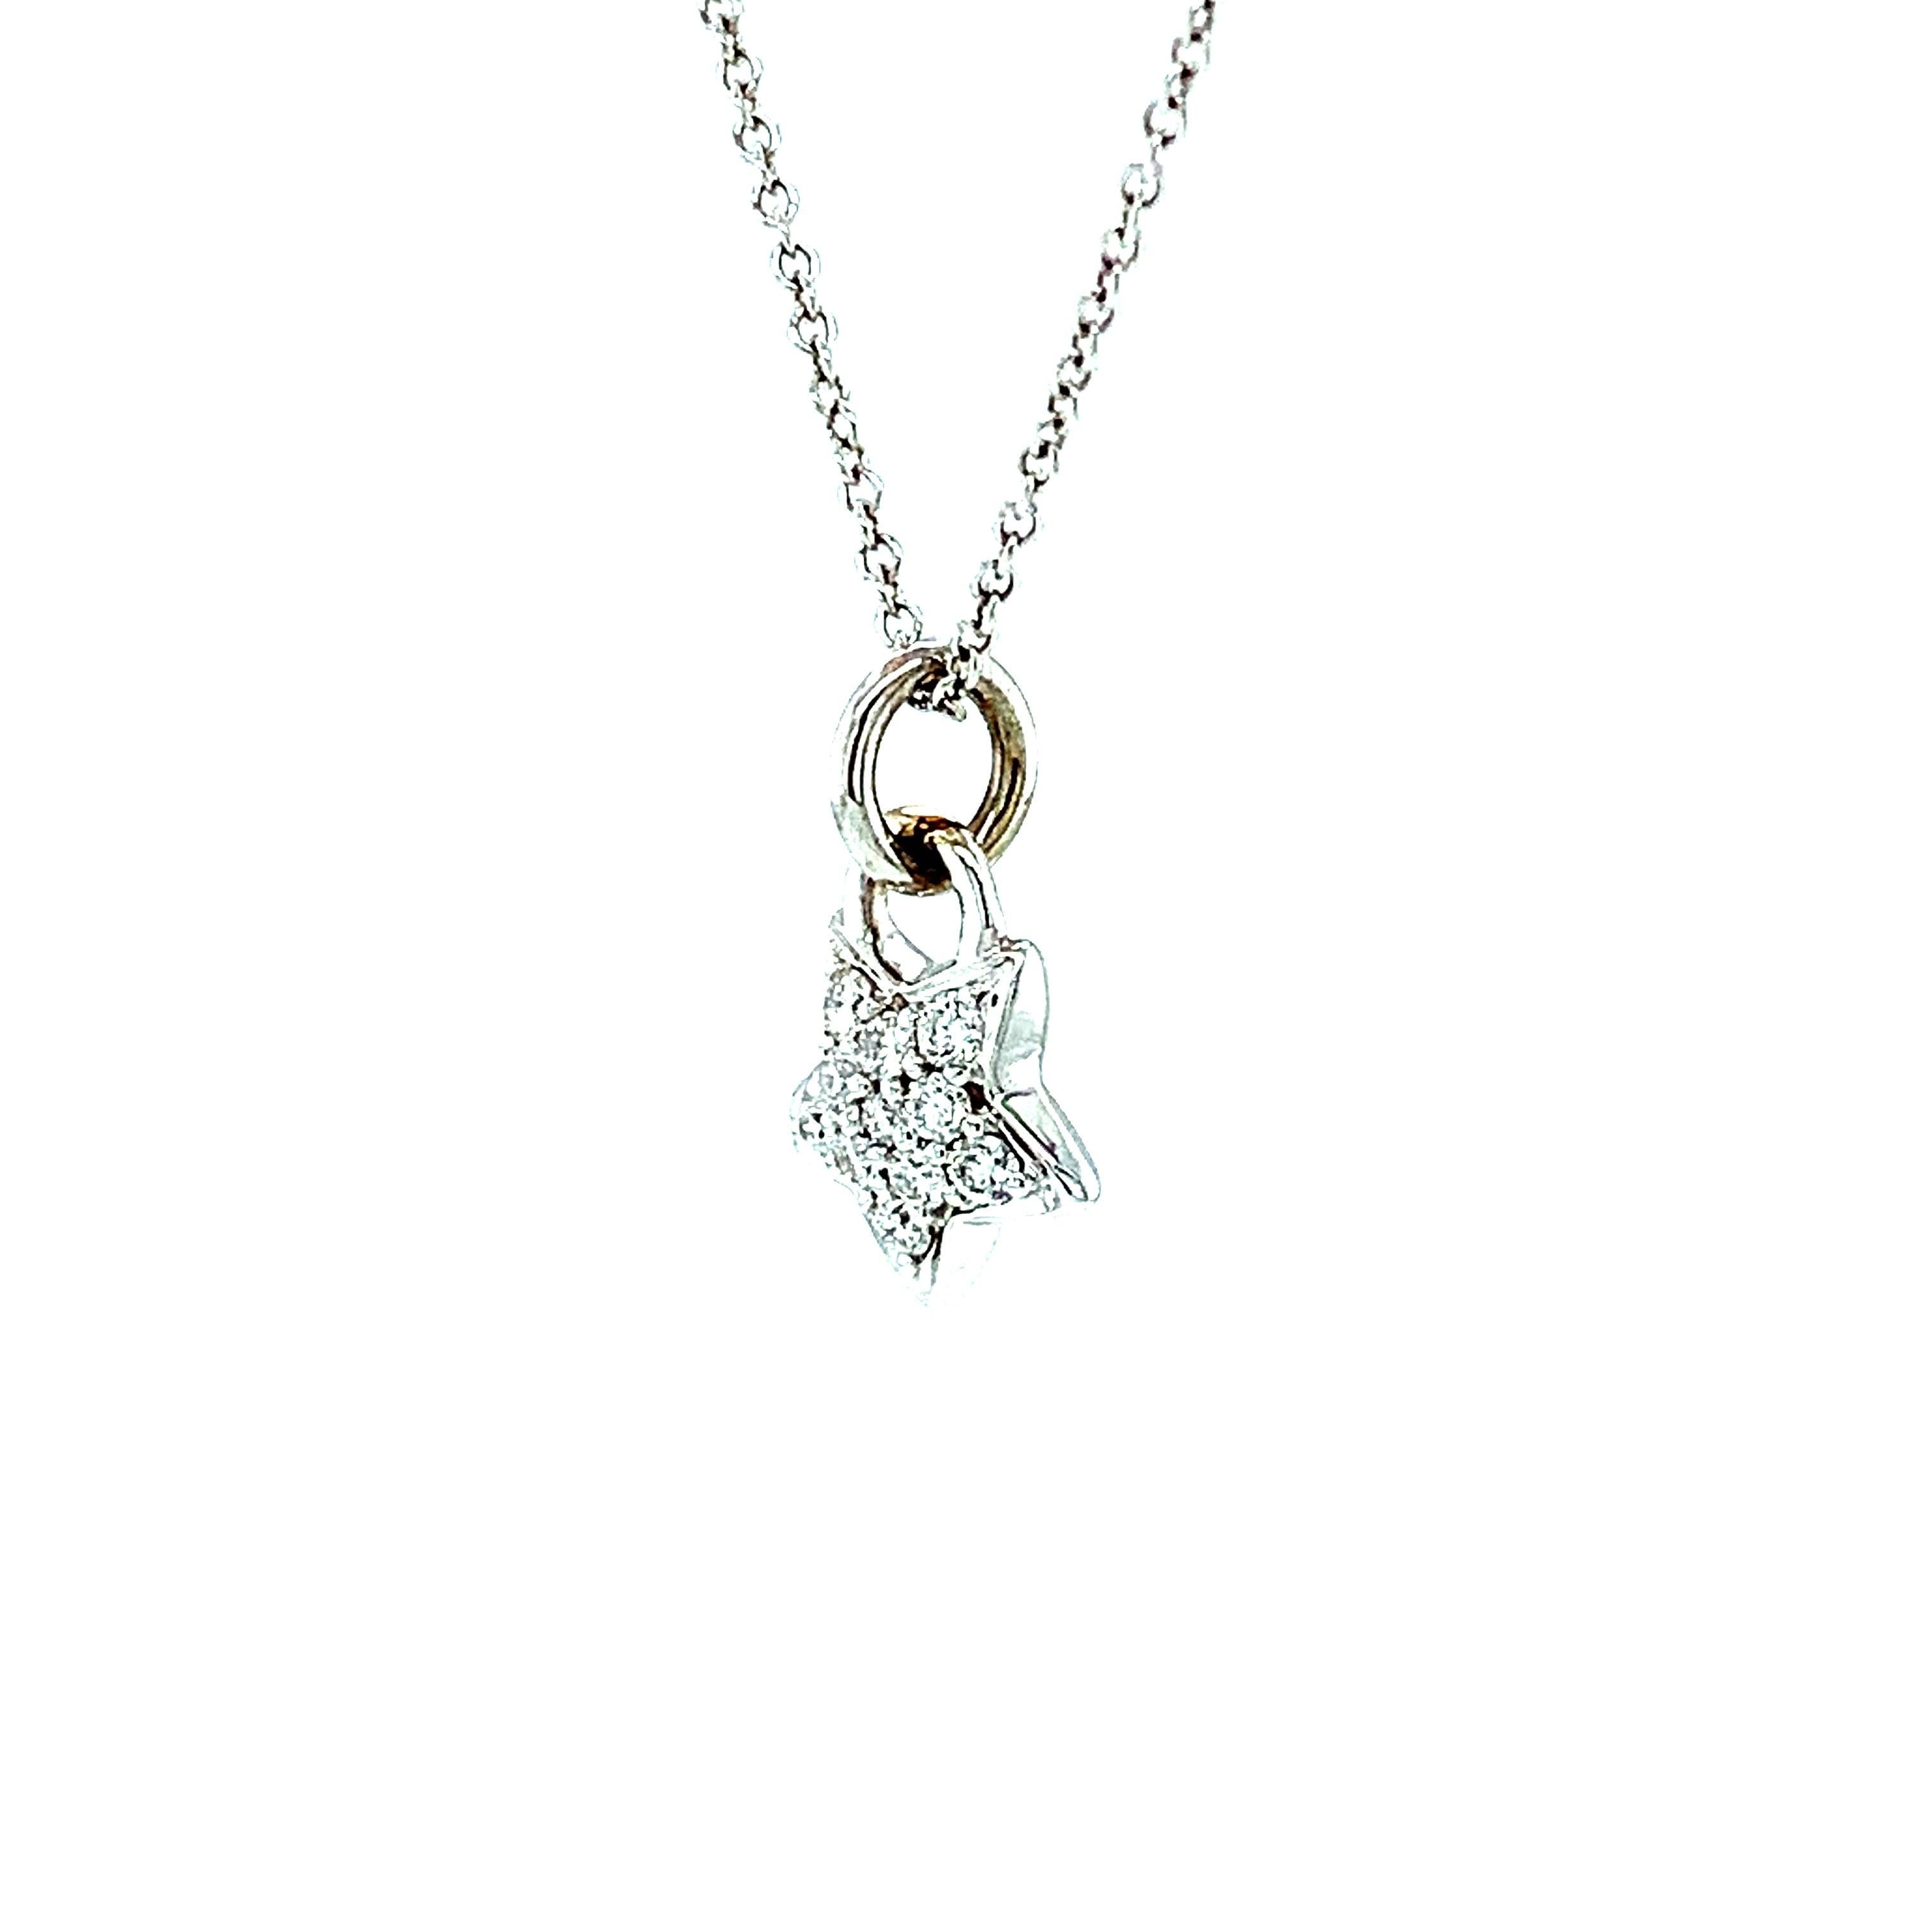 Women's or Men's Diamond and White Gold Dancing Star Pendant Necklace with Chain